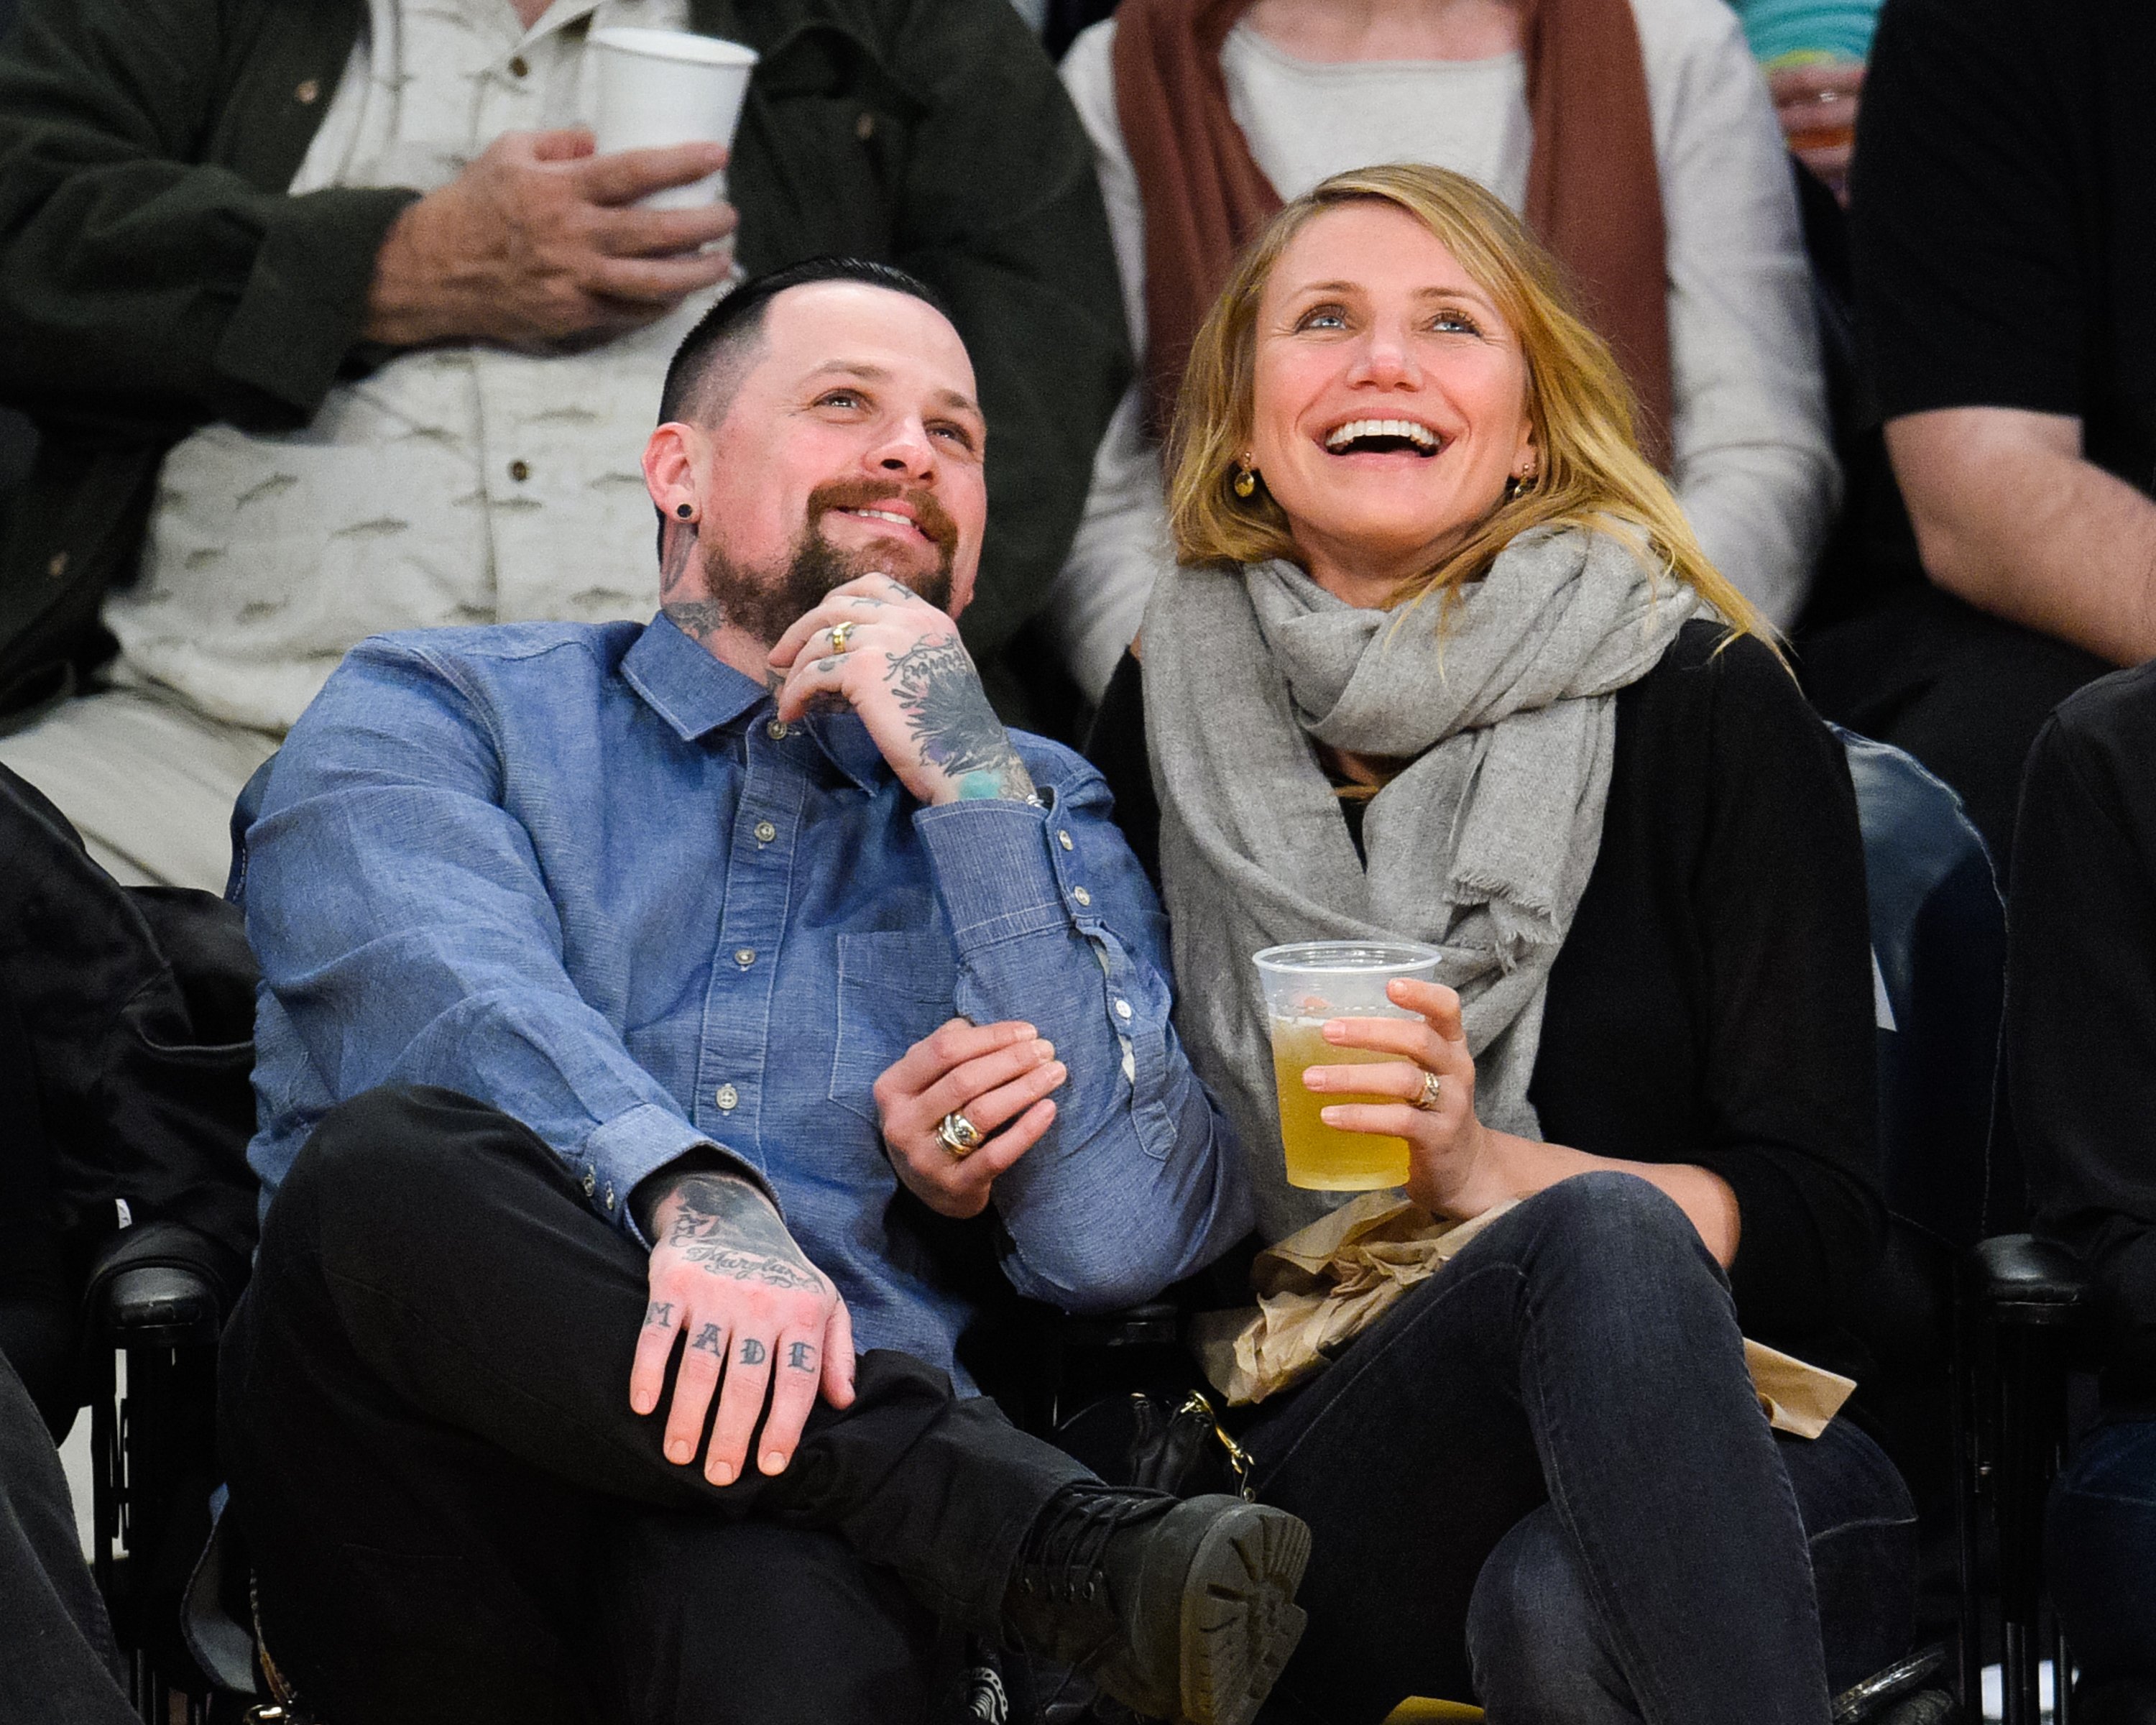 Benji Madden and Cameron Diaz at a basketball game at Staples Center on January 27, 2015, in Los Angeles, California. | Source: Getty Images